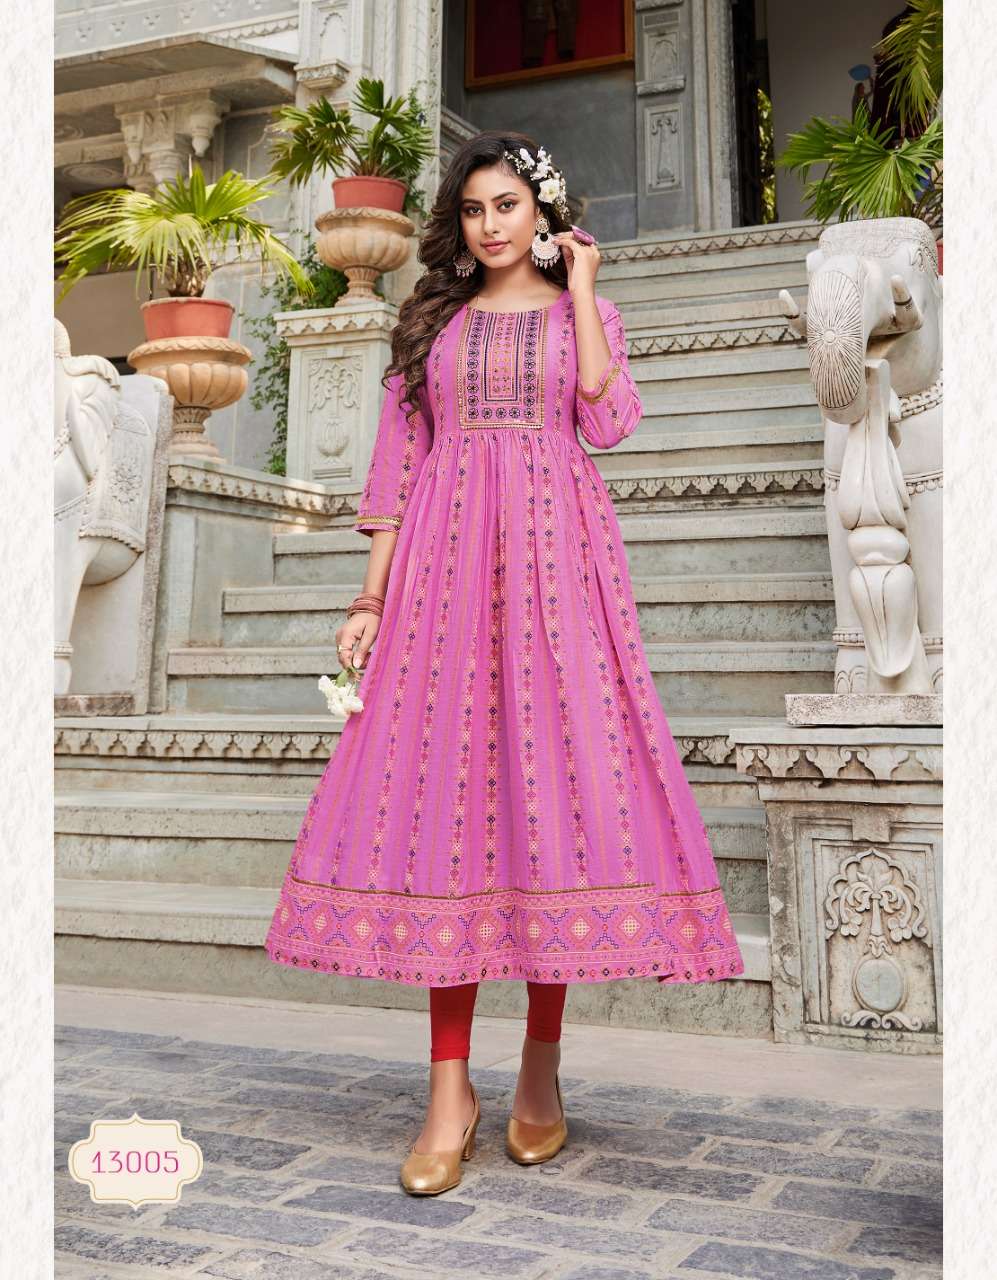 Ethnicity Vol 11 Diya Trends Premium Gowns Collection Rayon Lowest Price Kurtis Catalog Wholesale Price